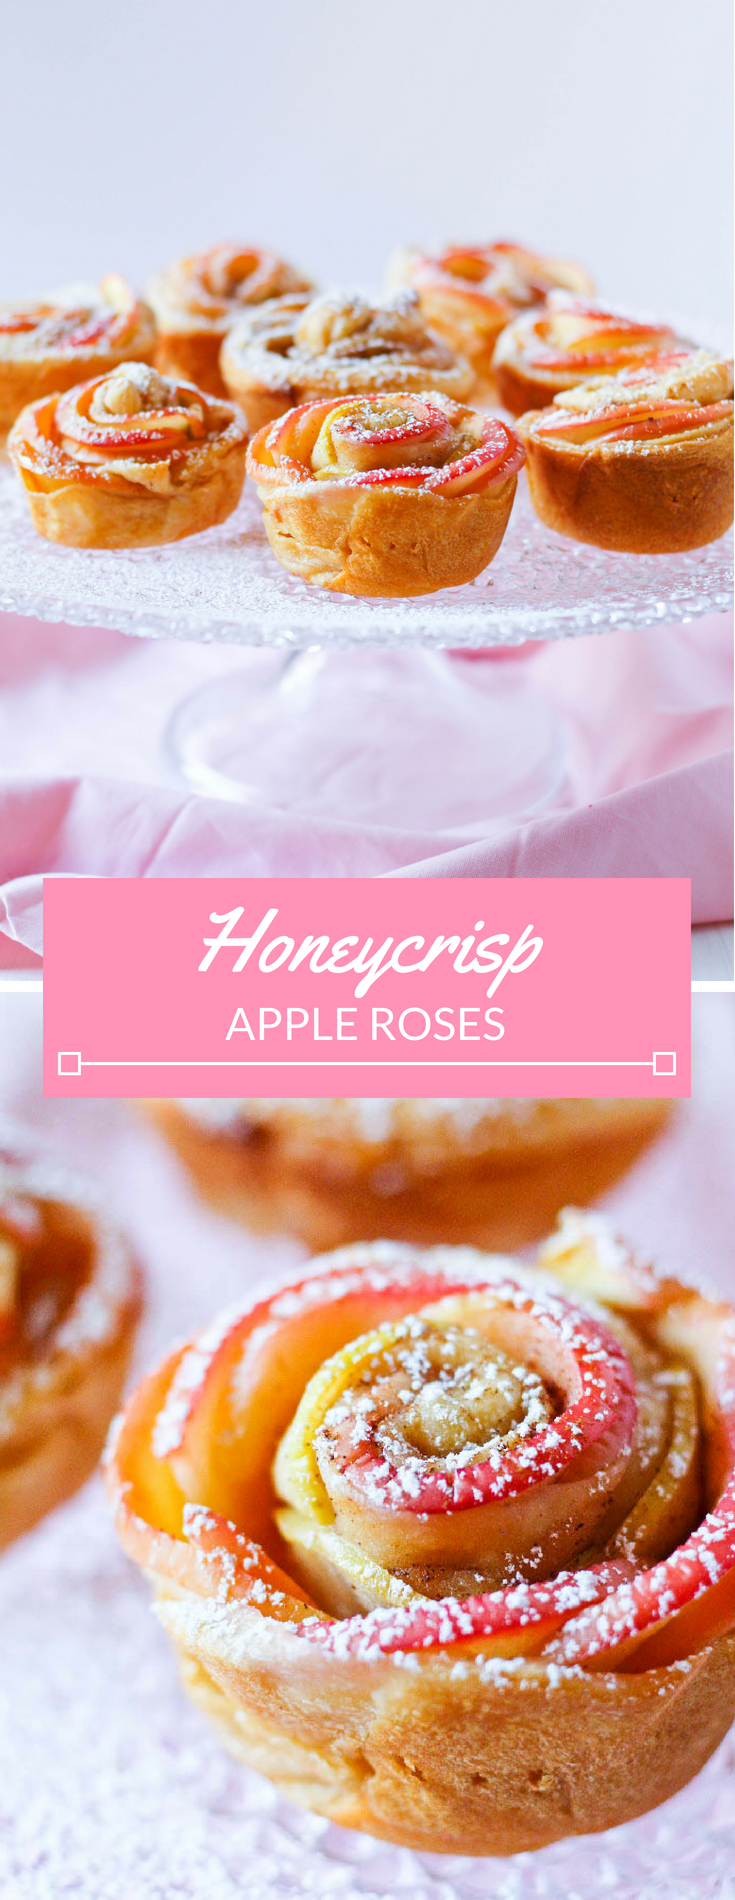 Soft Honeycrisp apple slices sprinkled with cinnamon and wrapped up in an apricot-preserve brushed croissant. These Honeycrisp apple roses are beautiful and impressive, yet very easy to make. 